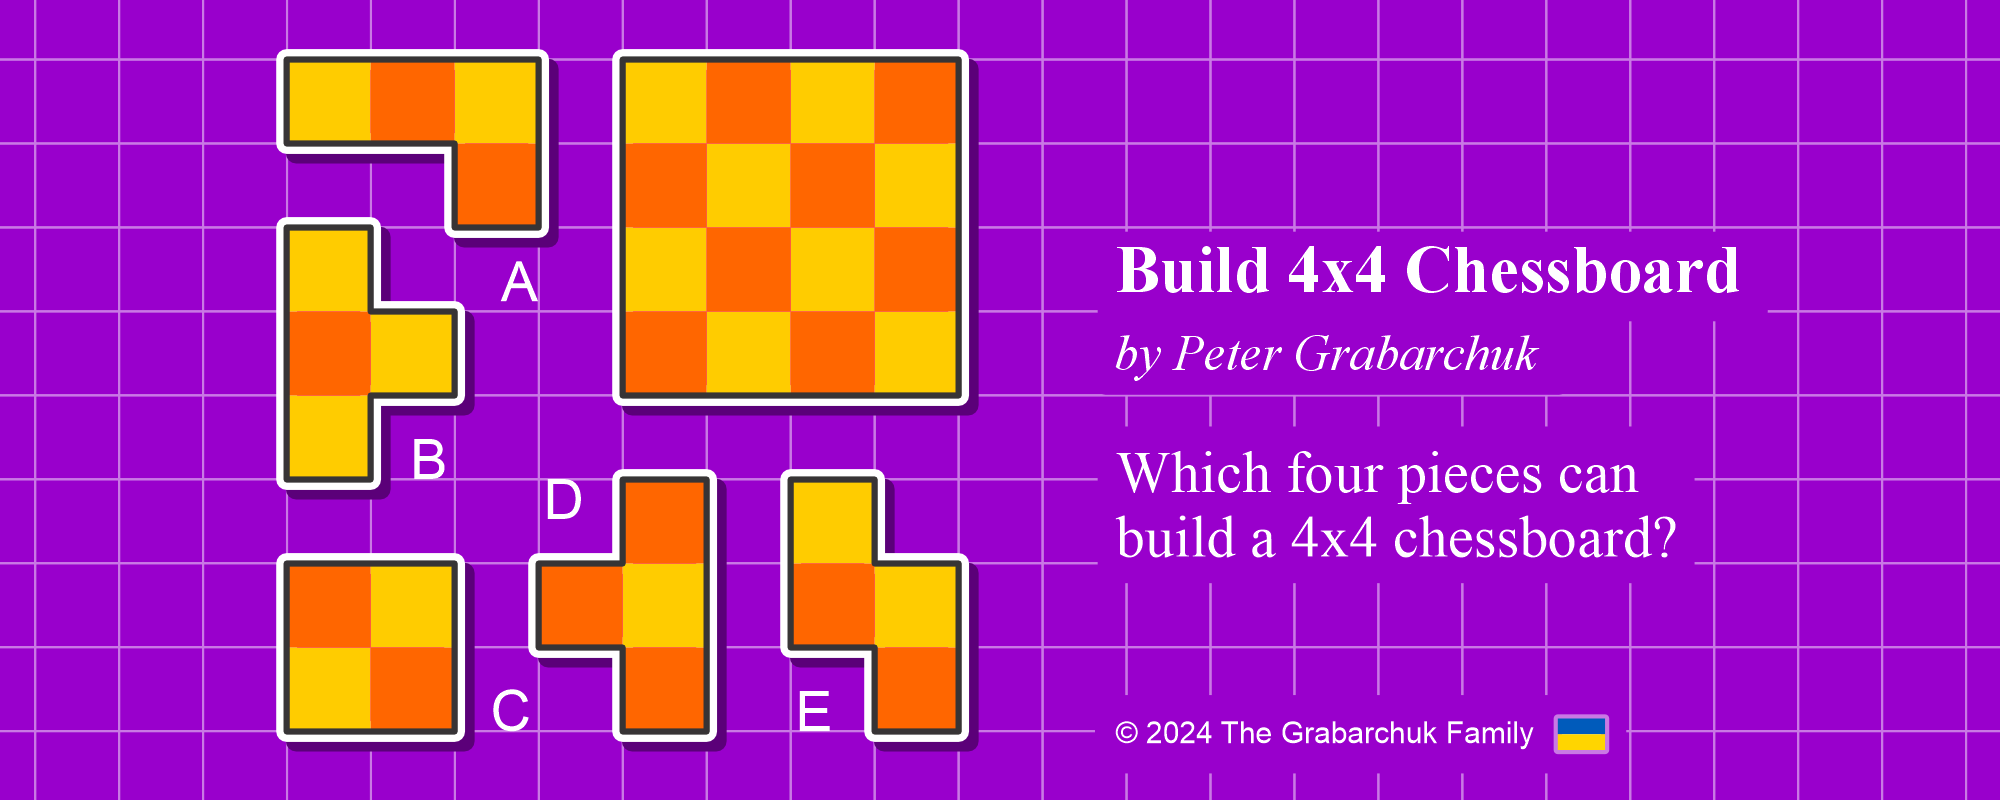 Build 4x4 Chessboard by Peter Grabarchuk